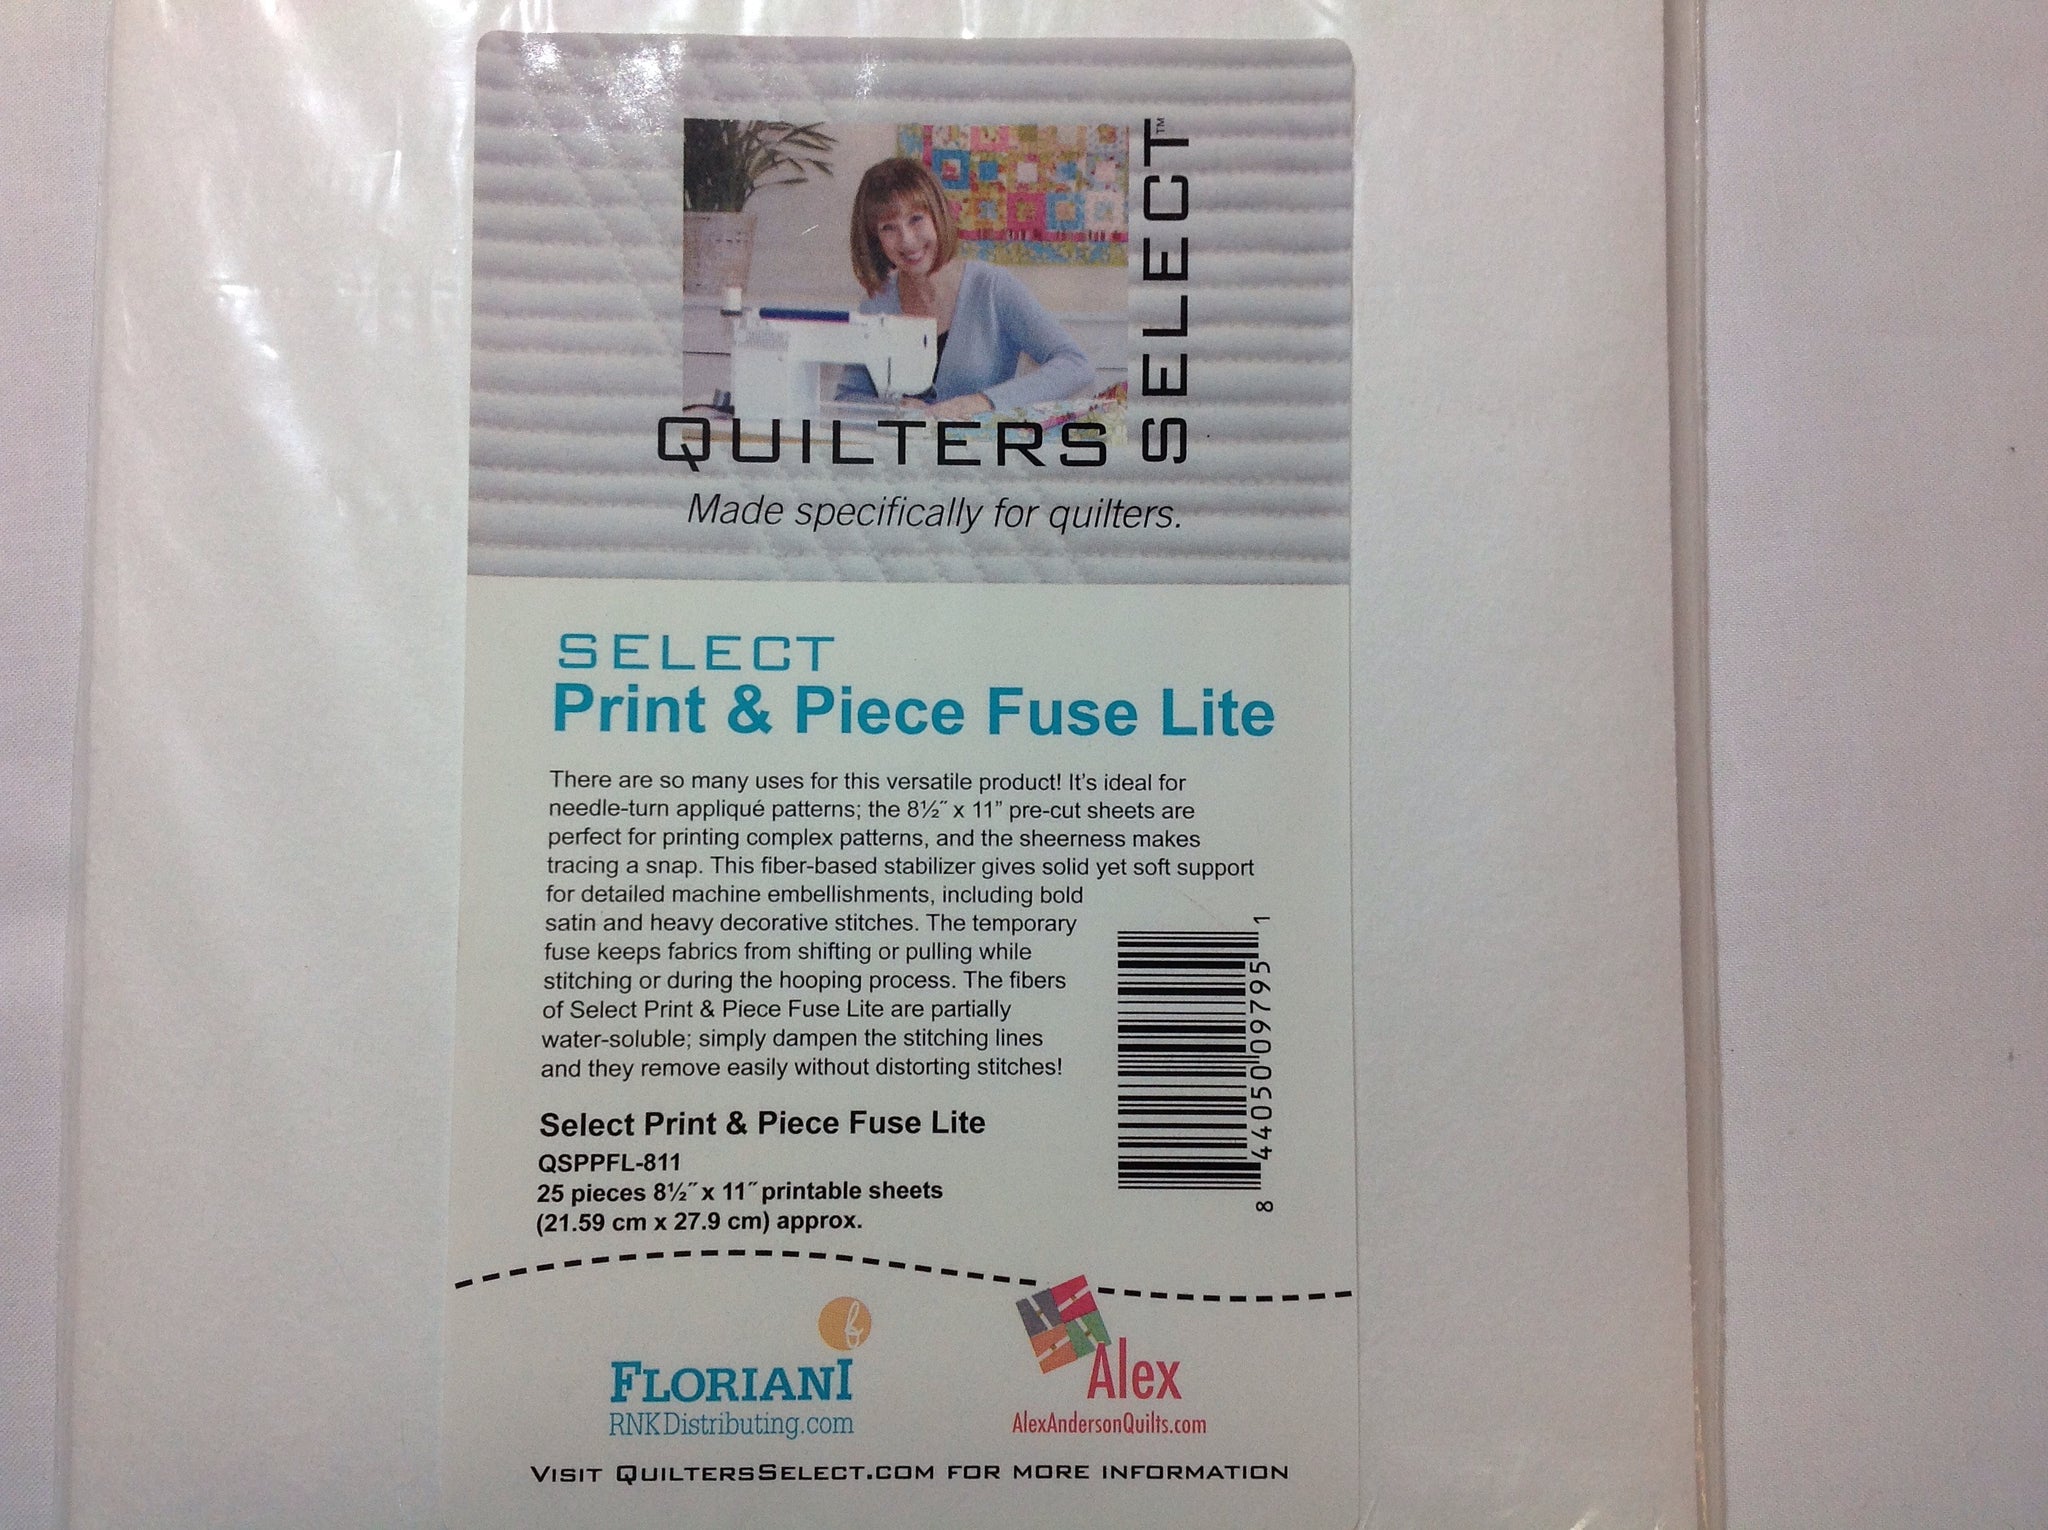 Print & piece fuse lite - Quilters Select